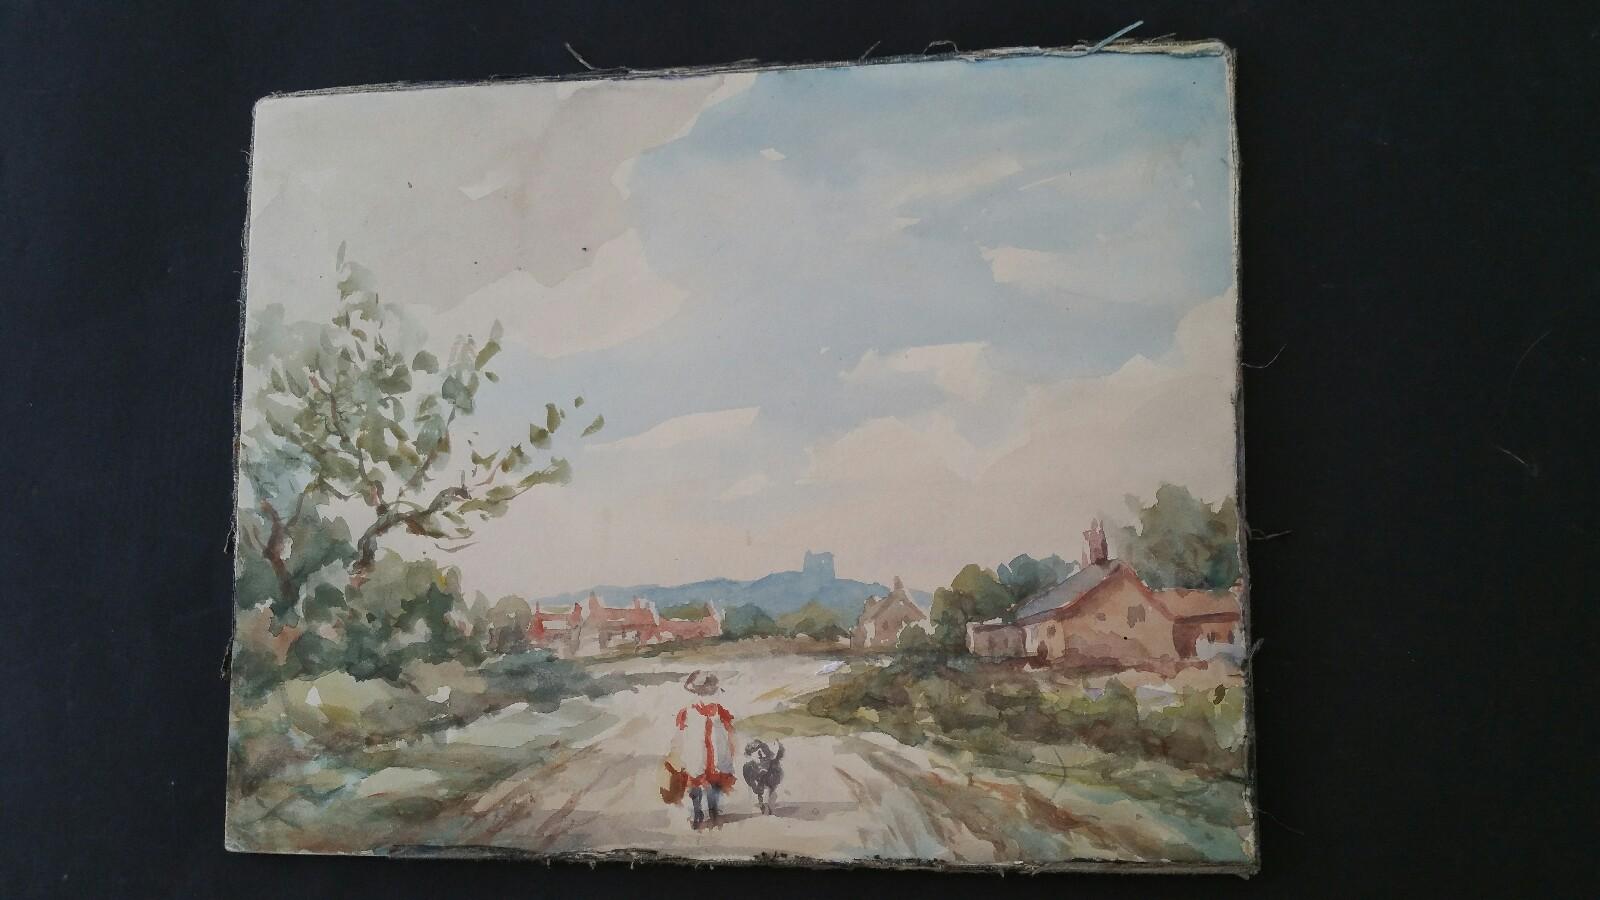 England, Child and her Dog strolling in Countryside
by Leonard Machin Rowe (1880-1968)
unsigned
watercolour painting on artist's paper affixed to board, unframed

sheet 8.5 x 11.25 inches

An utterly charming little painting by Leon. Rowe, unsigned